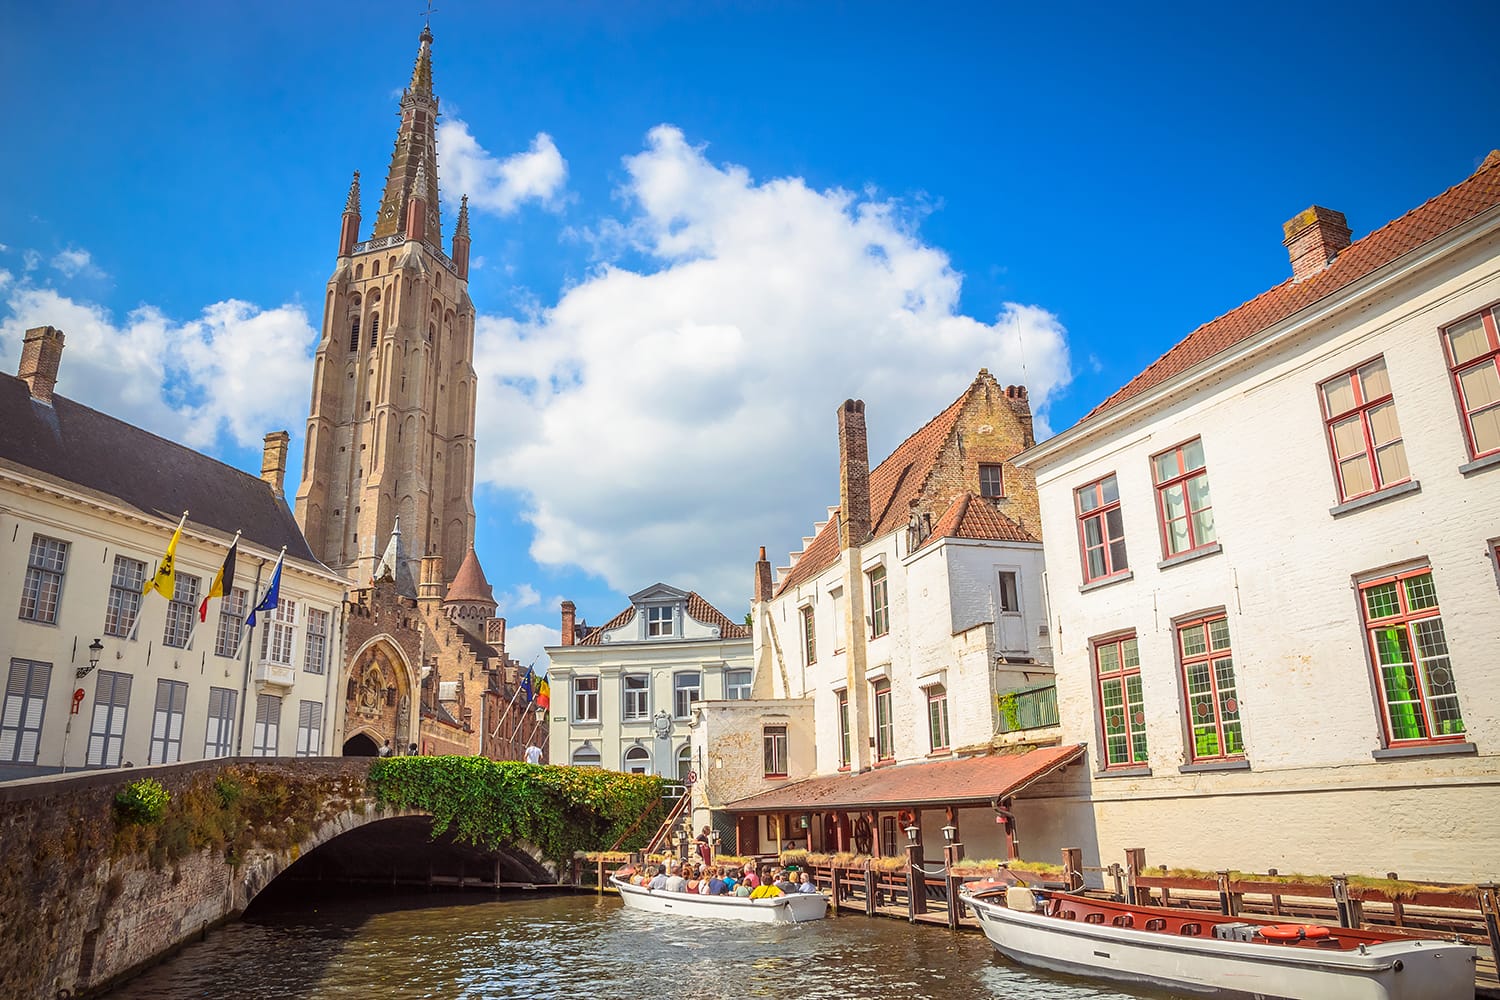 Church Of Our Lady and traditional narrow streets in Bruges (Brugge), Belgium